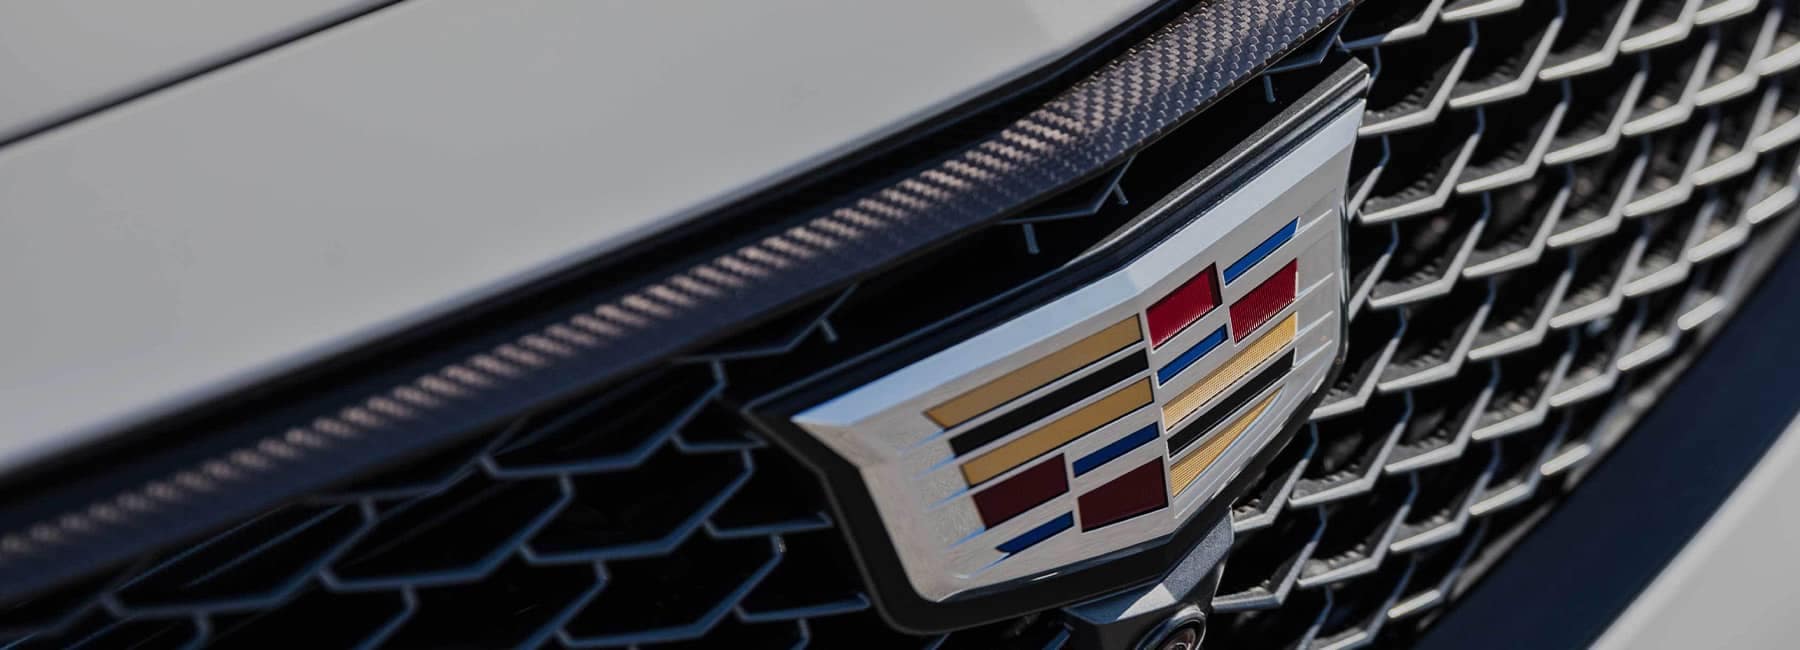 2022 Cadillac CT5-V front grille